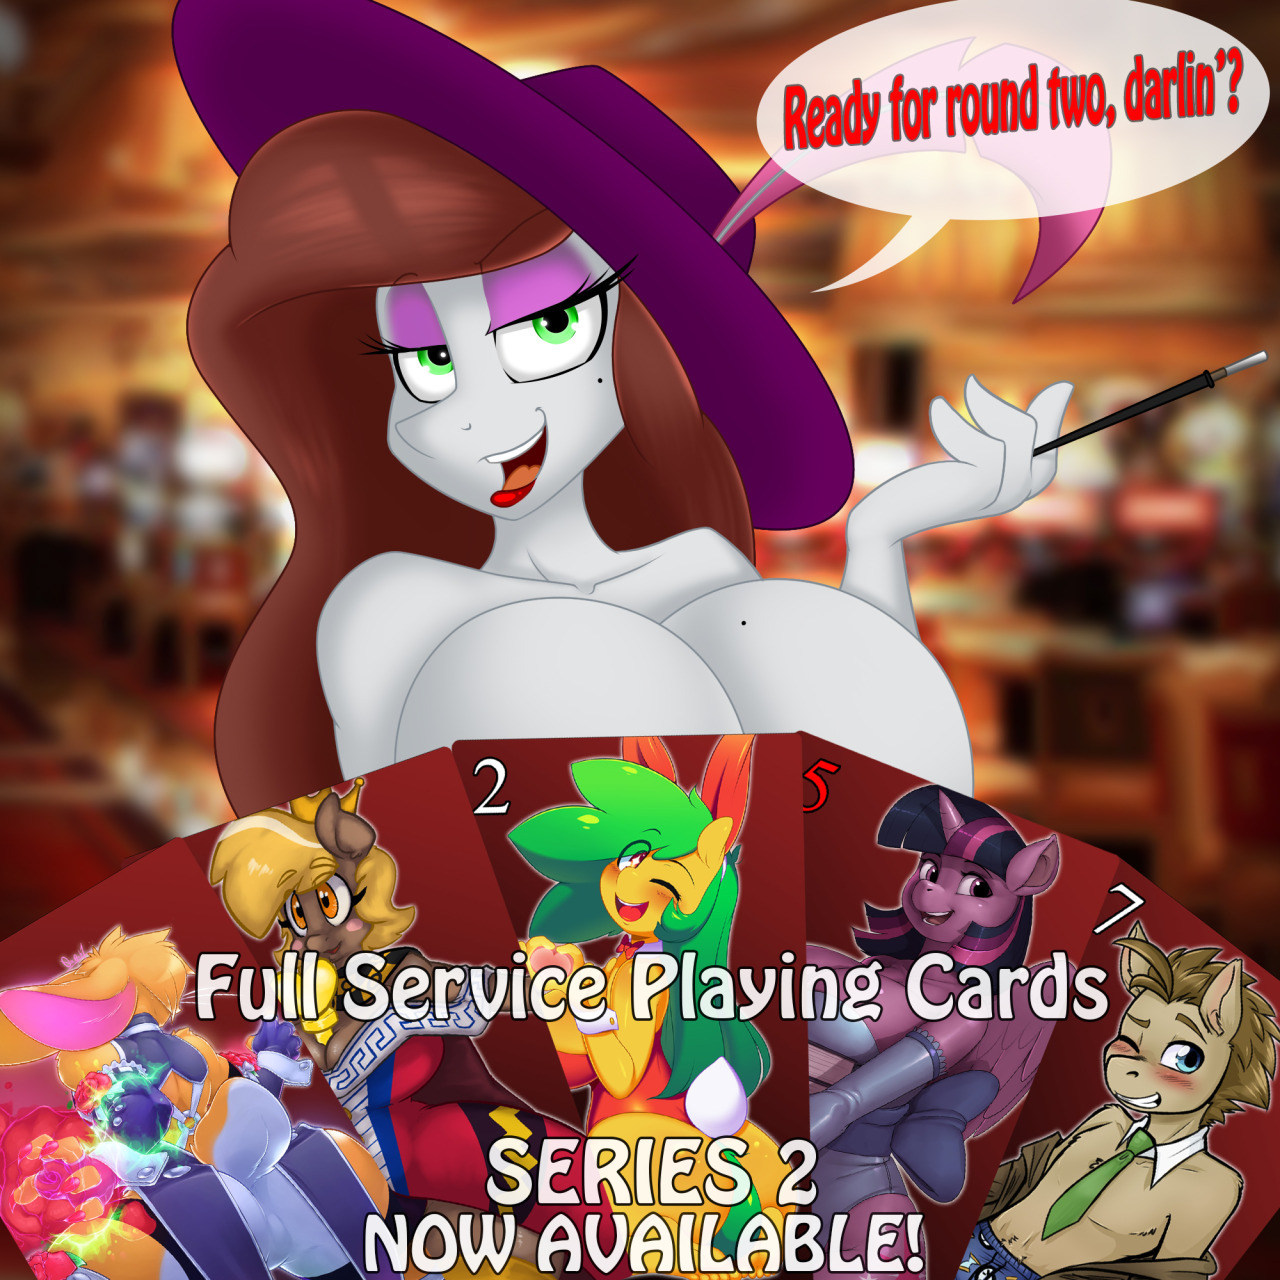 lil-miss-eidi:   WELCOME TO FULL SERVICE CASINO! Please, relax, make yourself at